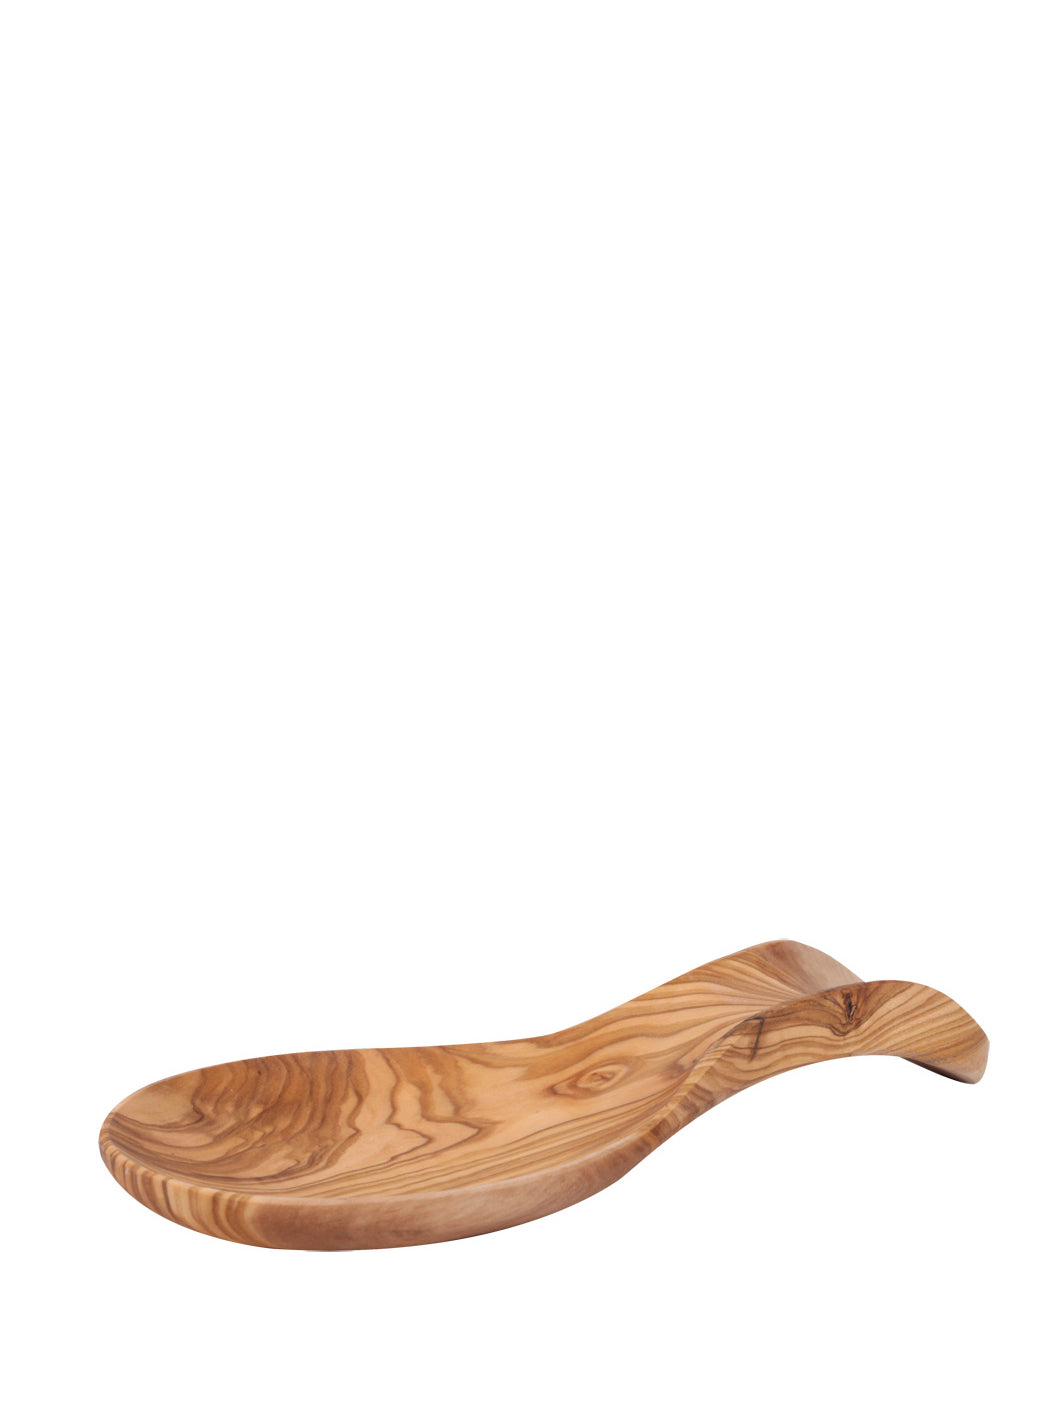 Spoon rest, olive wood